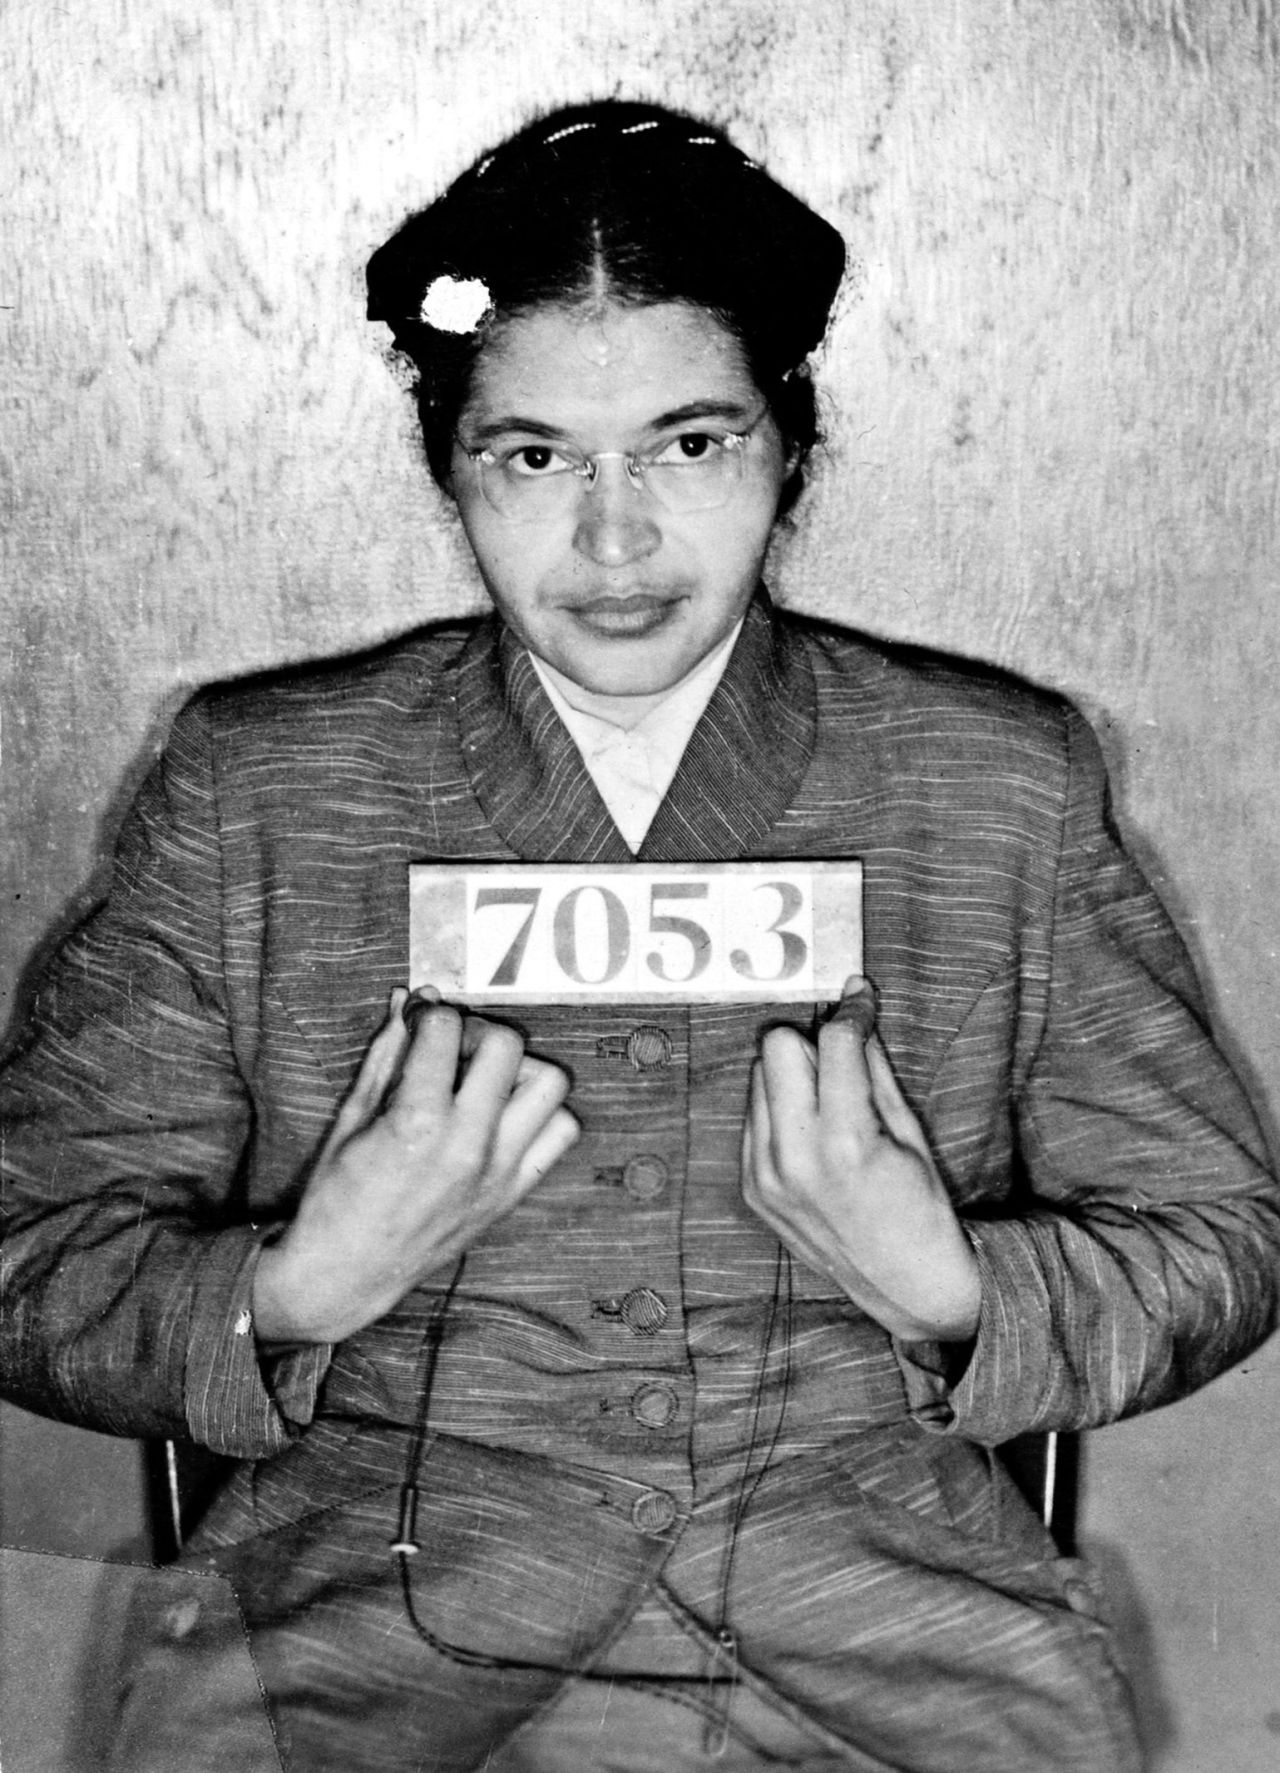 Booking photo taken at the time of Rosa Parks' arrest for refusing to give up her seat on a Montgomery, Alabama, bus to a white passenger on 1 December 1955. 